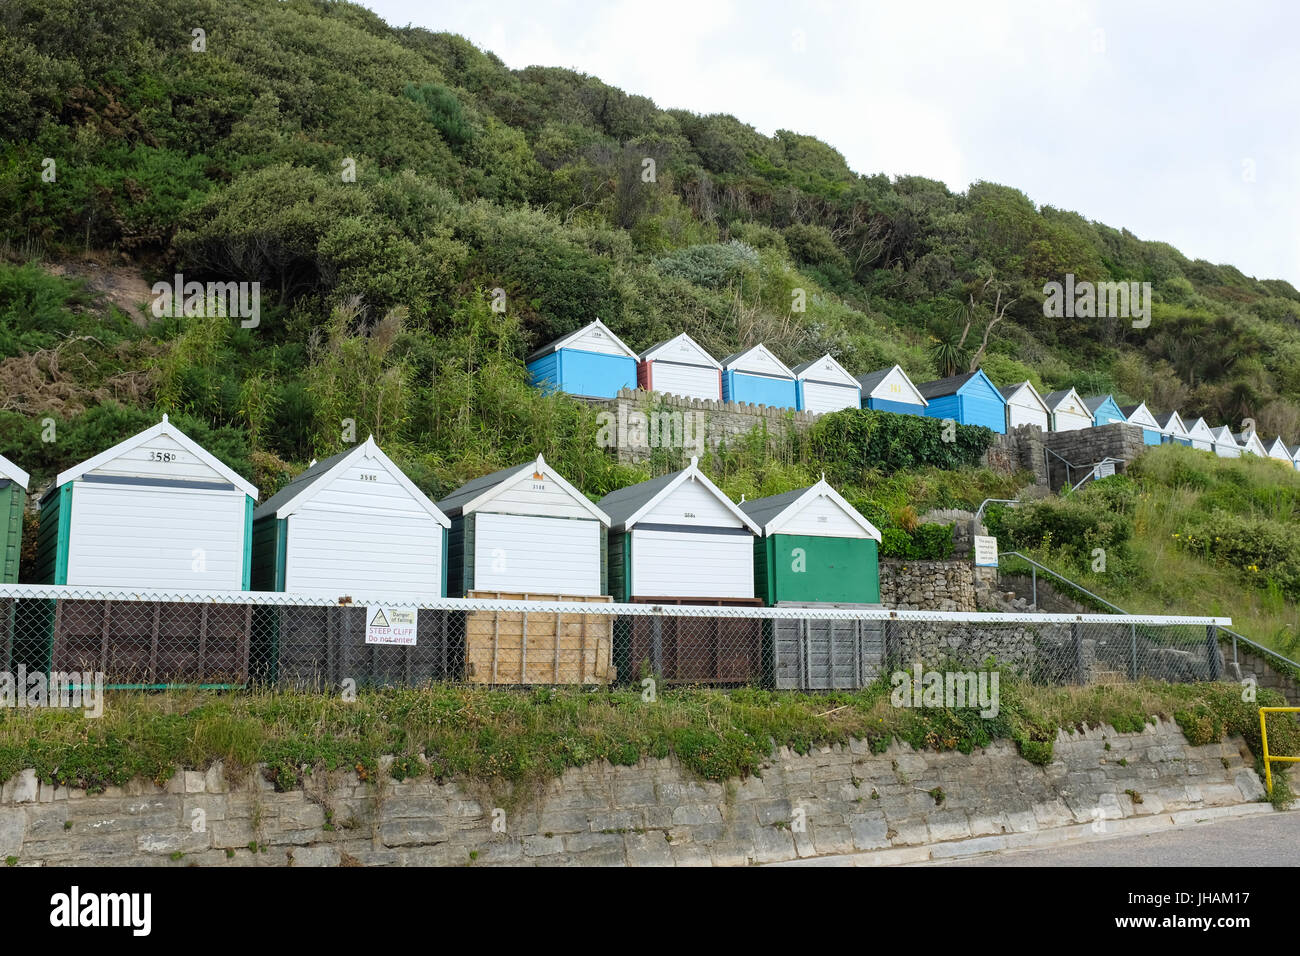 Beach chalets in Bournemouth, Dorset, England. Stock Photo